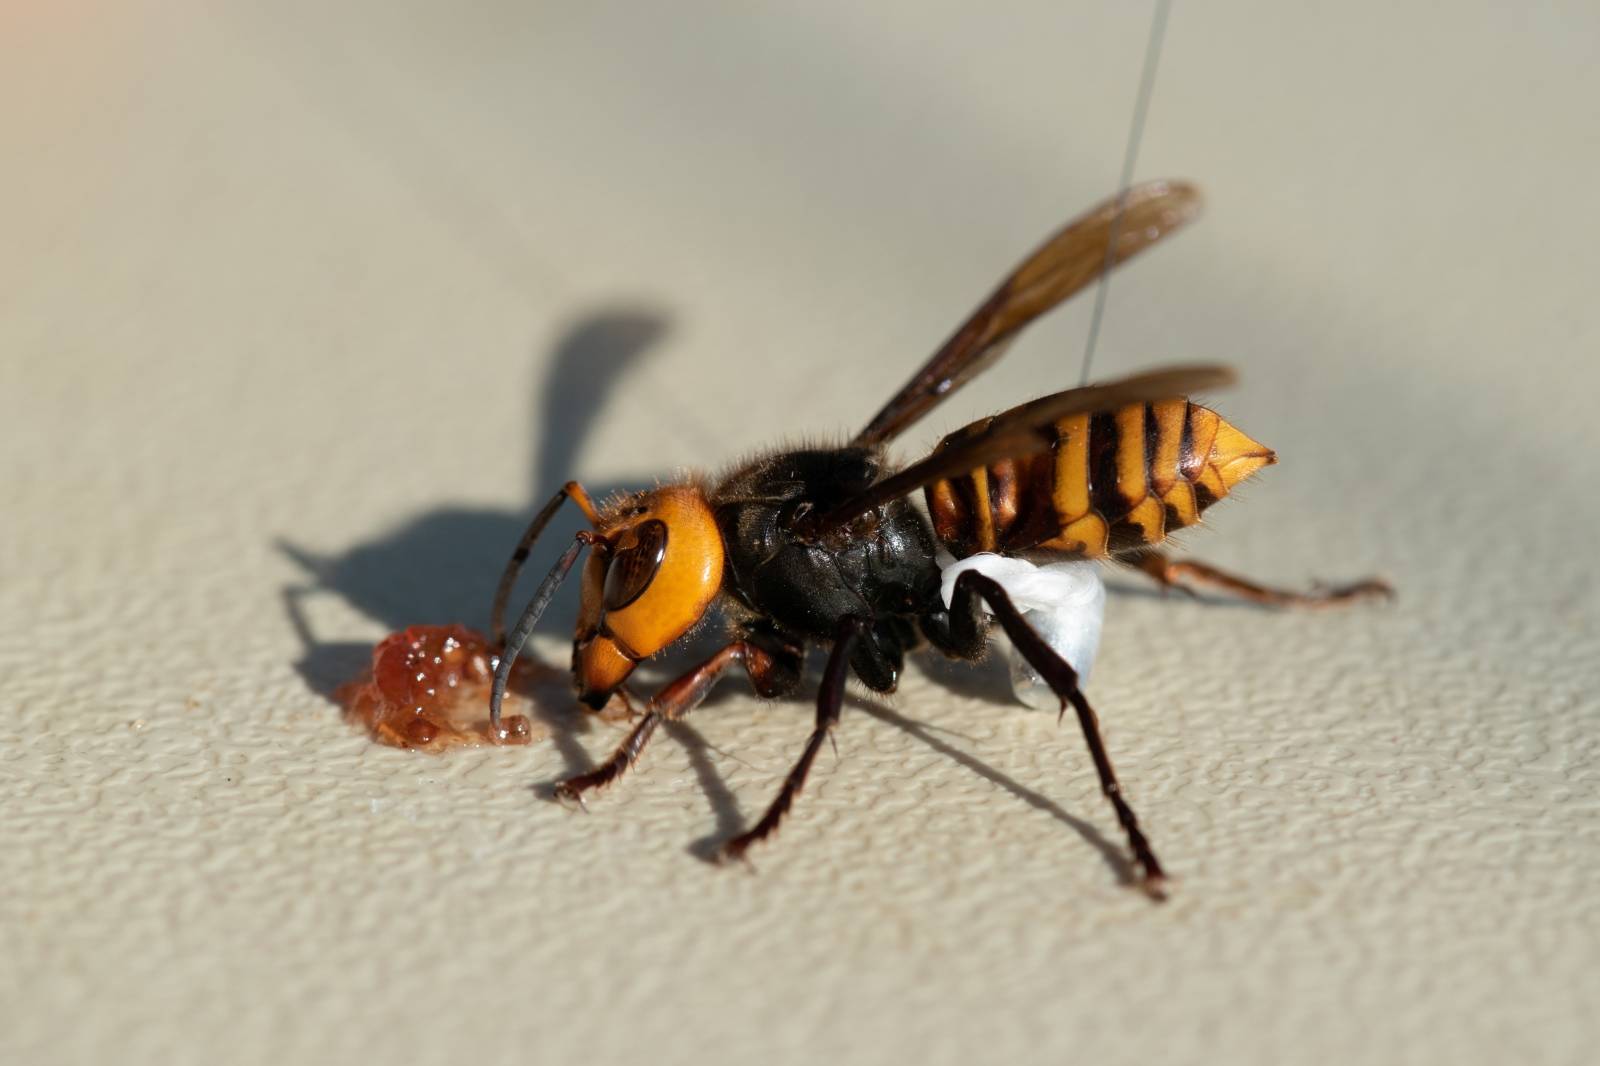 A radio tracking device fitted by Washington State Department of Agriculture (WSDA) entomologists is seen on an Asian giant hornet near Blaine